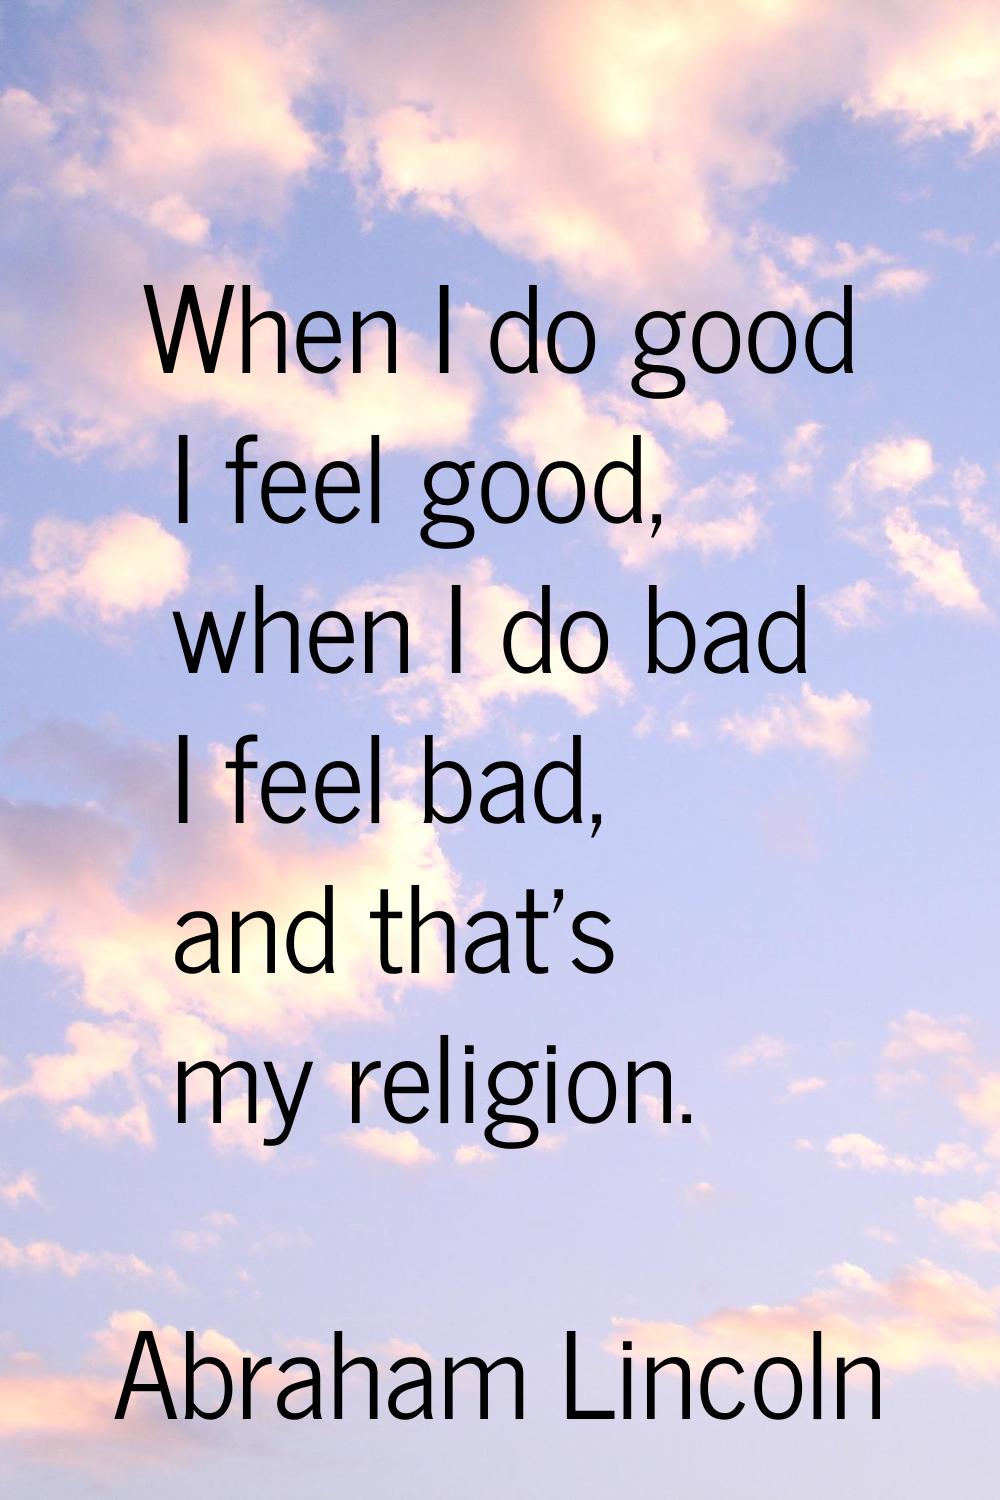 When I do good I feel good, when I do bad I feel bad, and that's my religion.